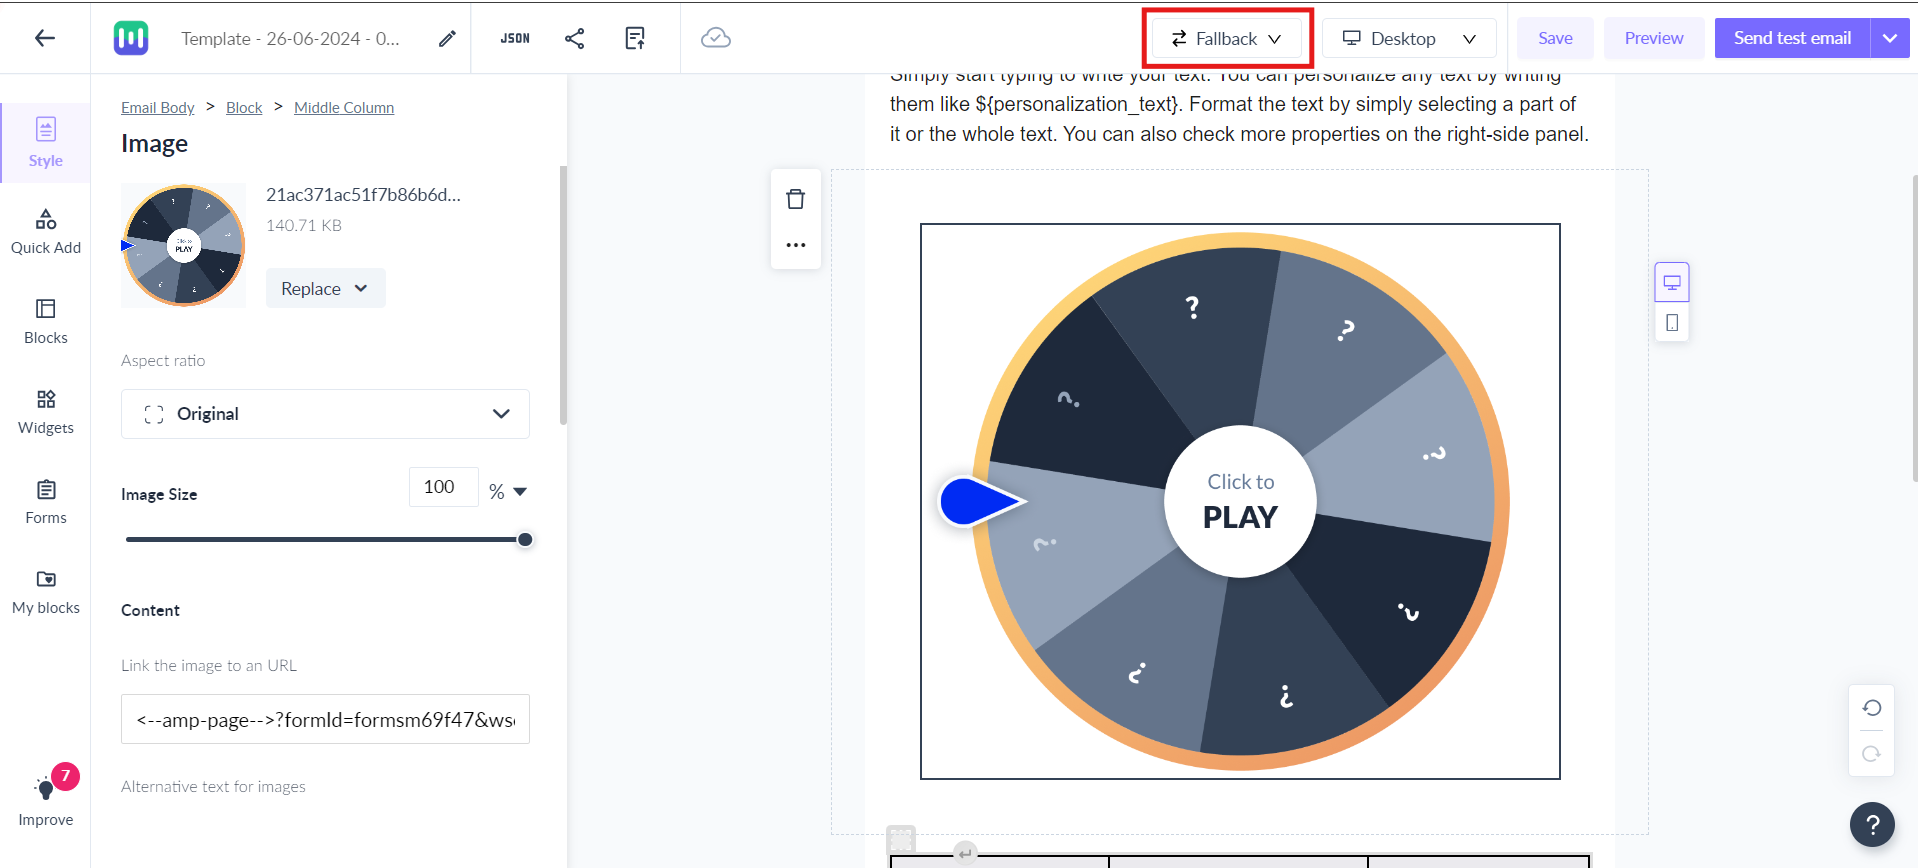 How to use Spin the Wheel widget in the editor for your campaigns?